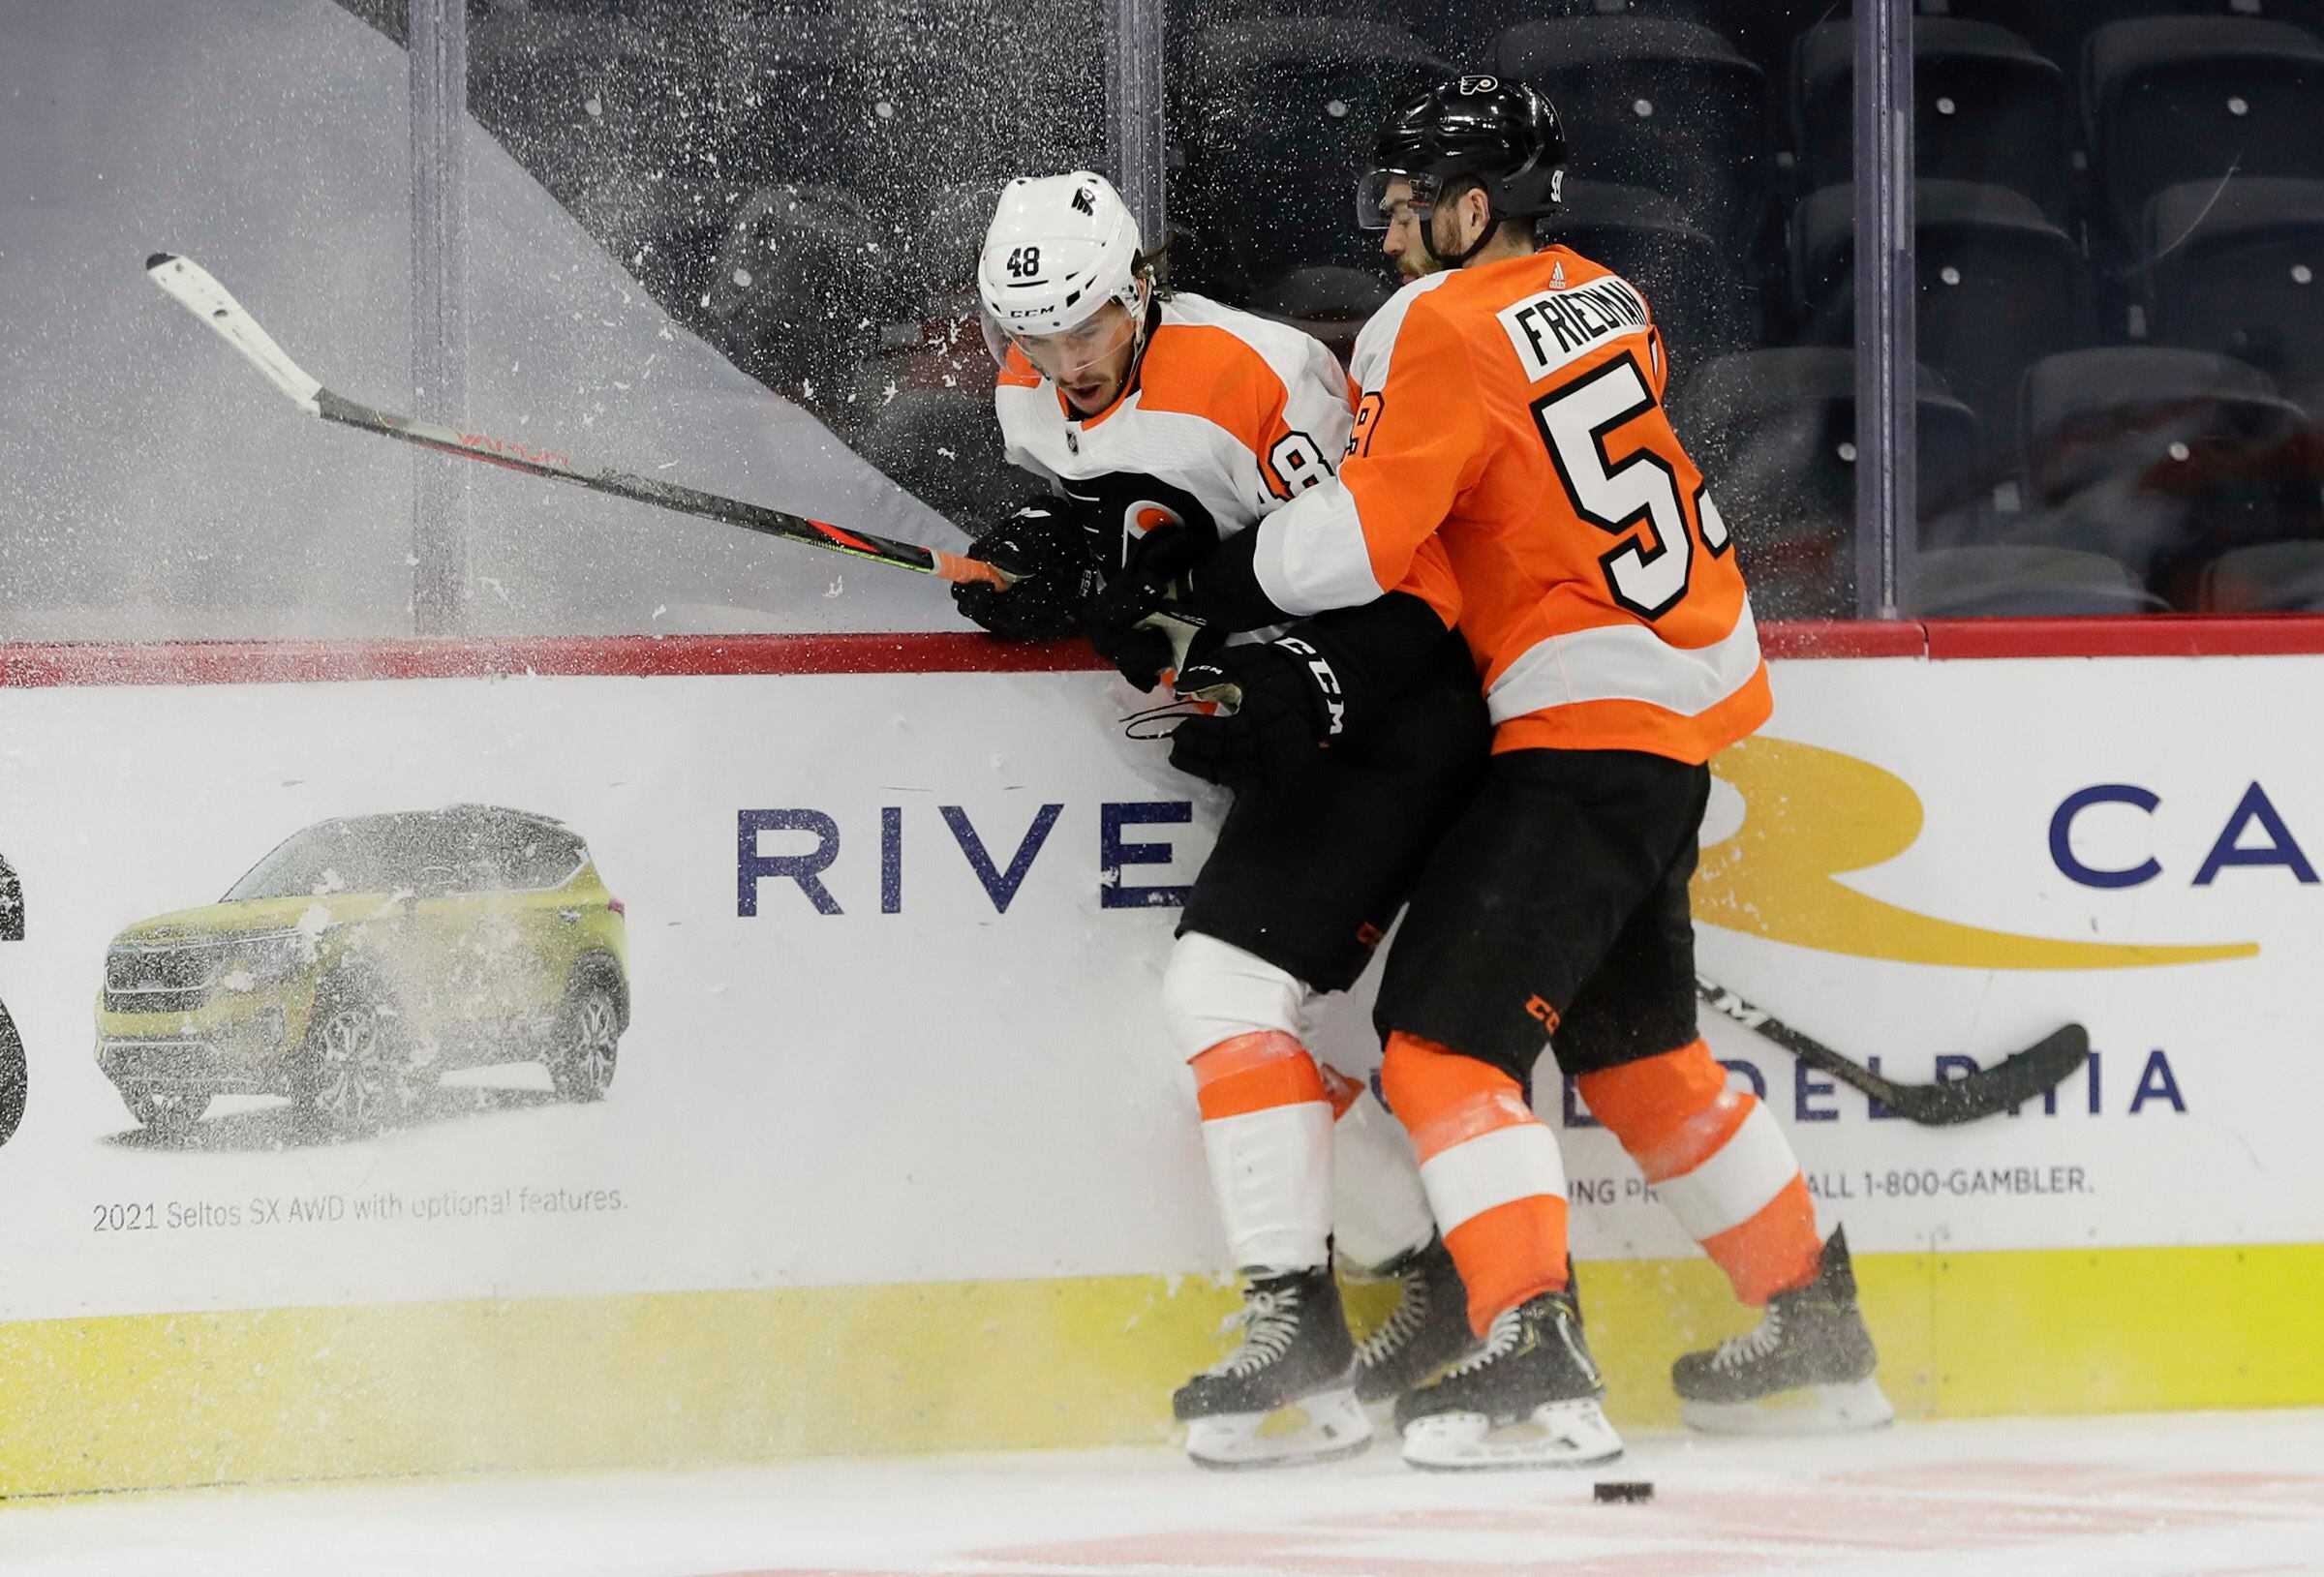 Travis Konecny and Morgan Frost score to give Flyers 5-2 win